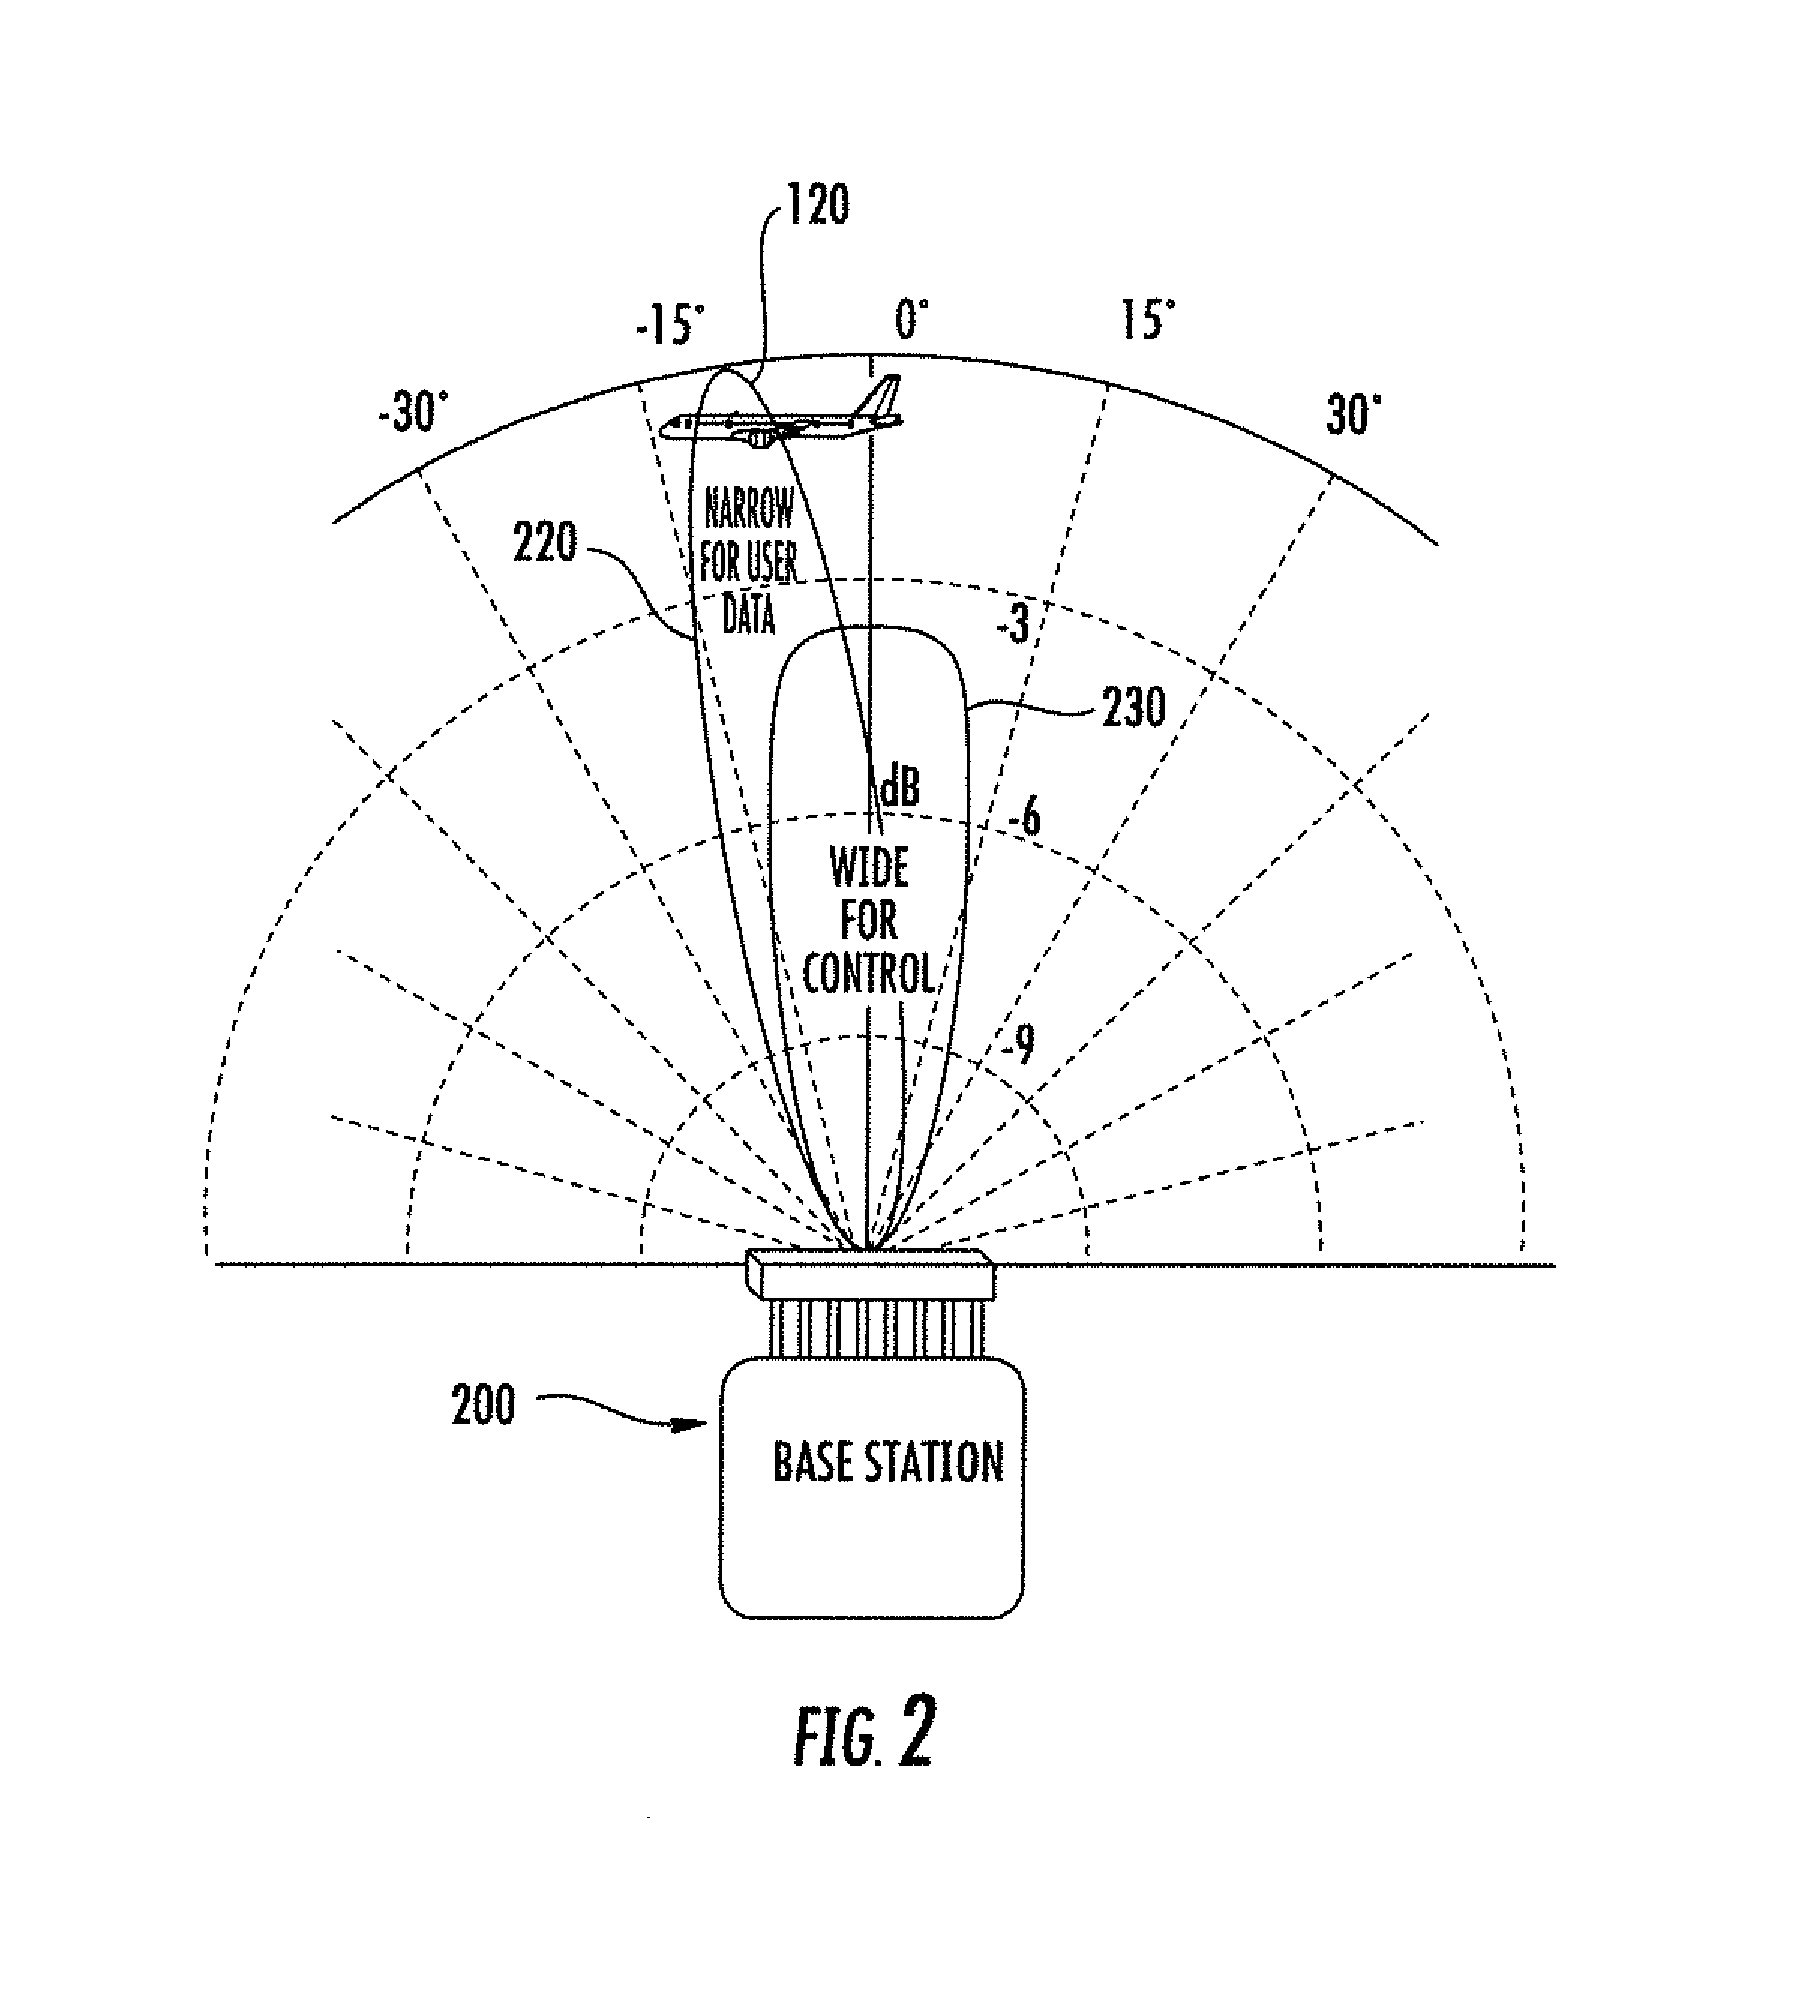 Terrestrial based air-to-ground communications system and related methods